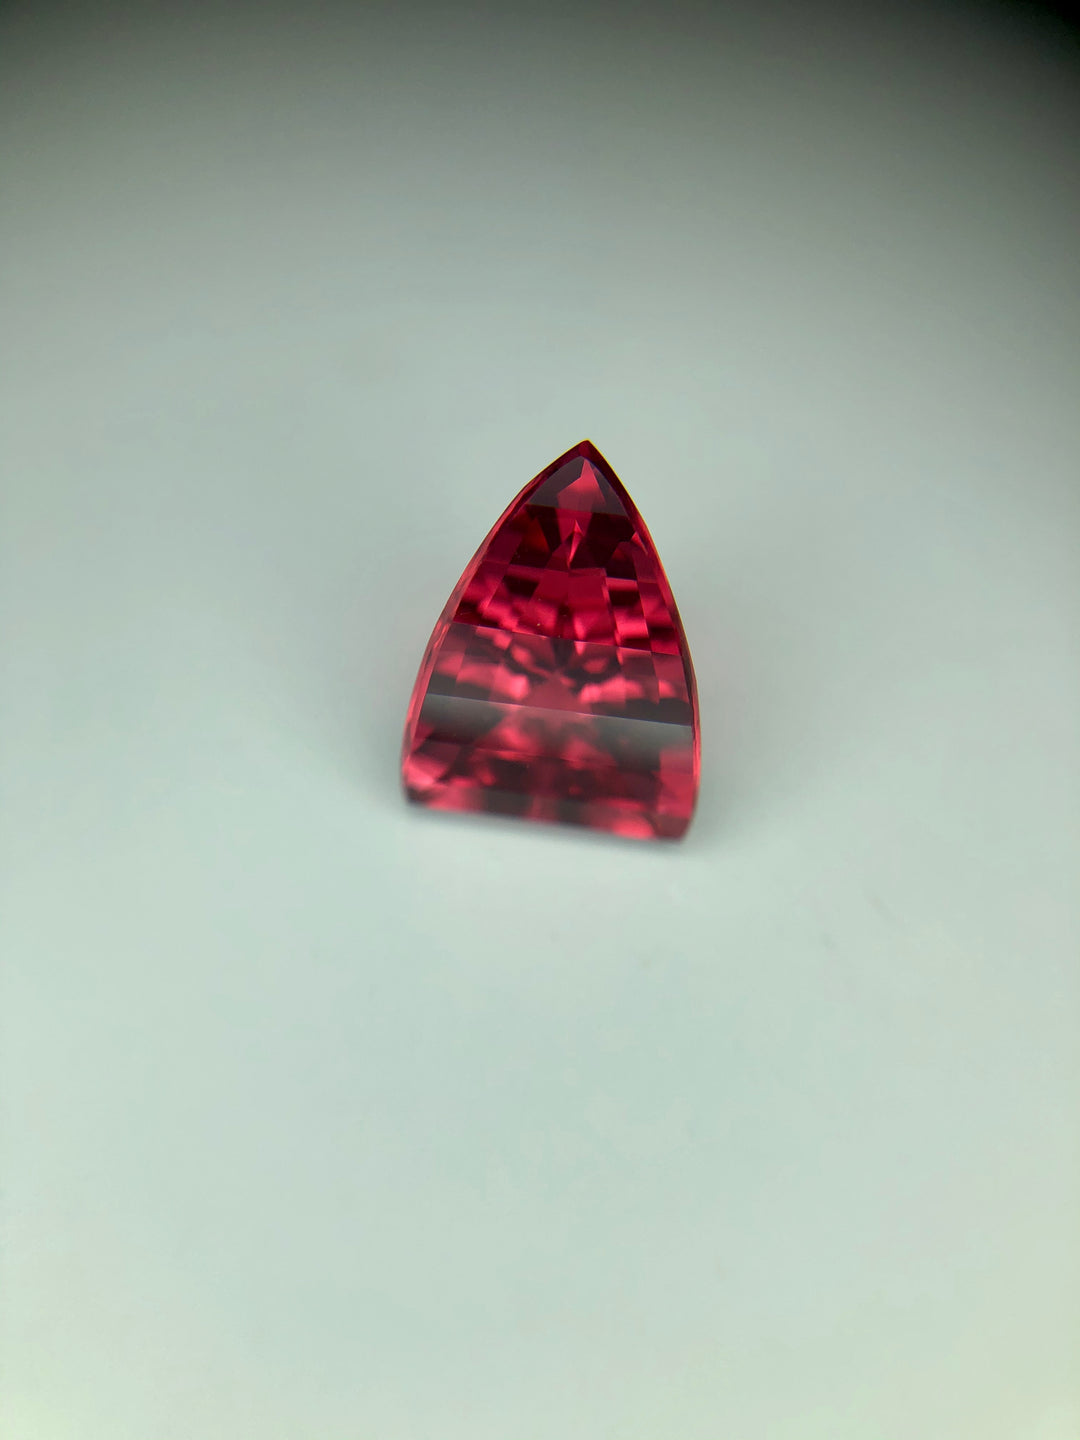 Natural Red Spinel 2.29 ct, Untreated Gemstone, Fancy Shape Spinel